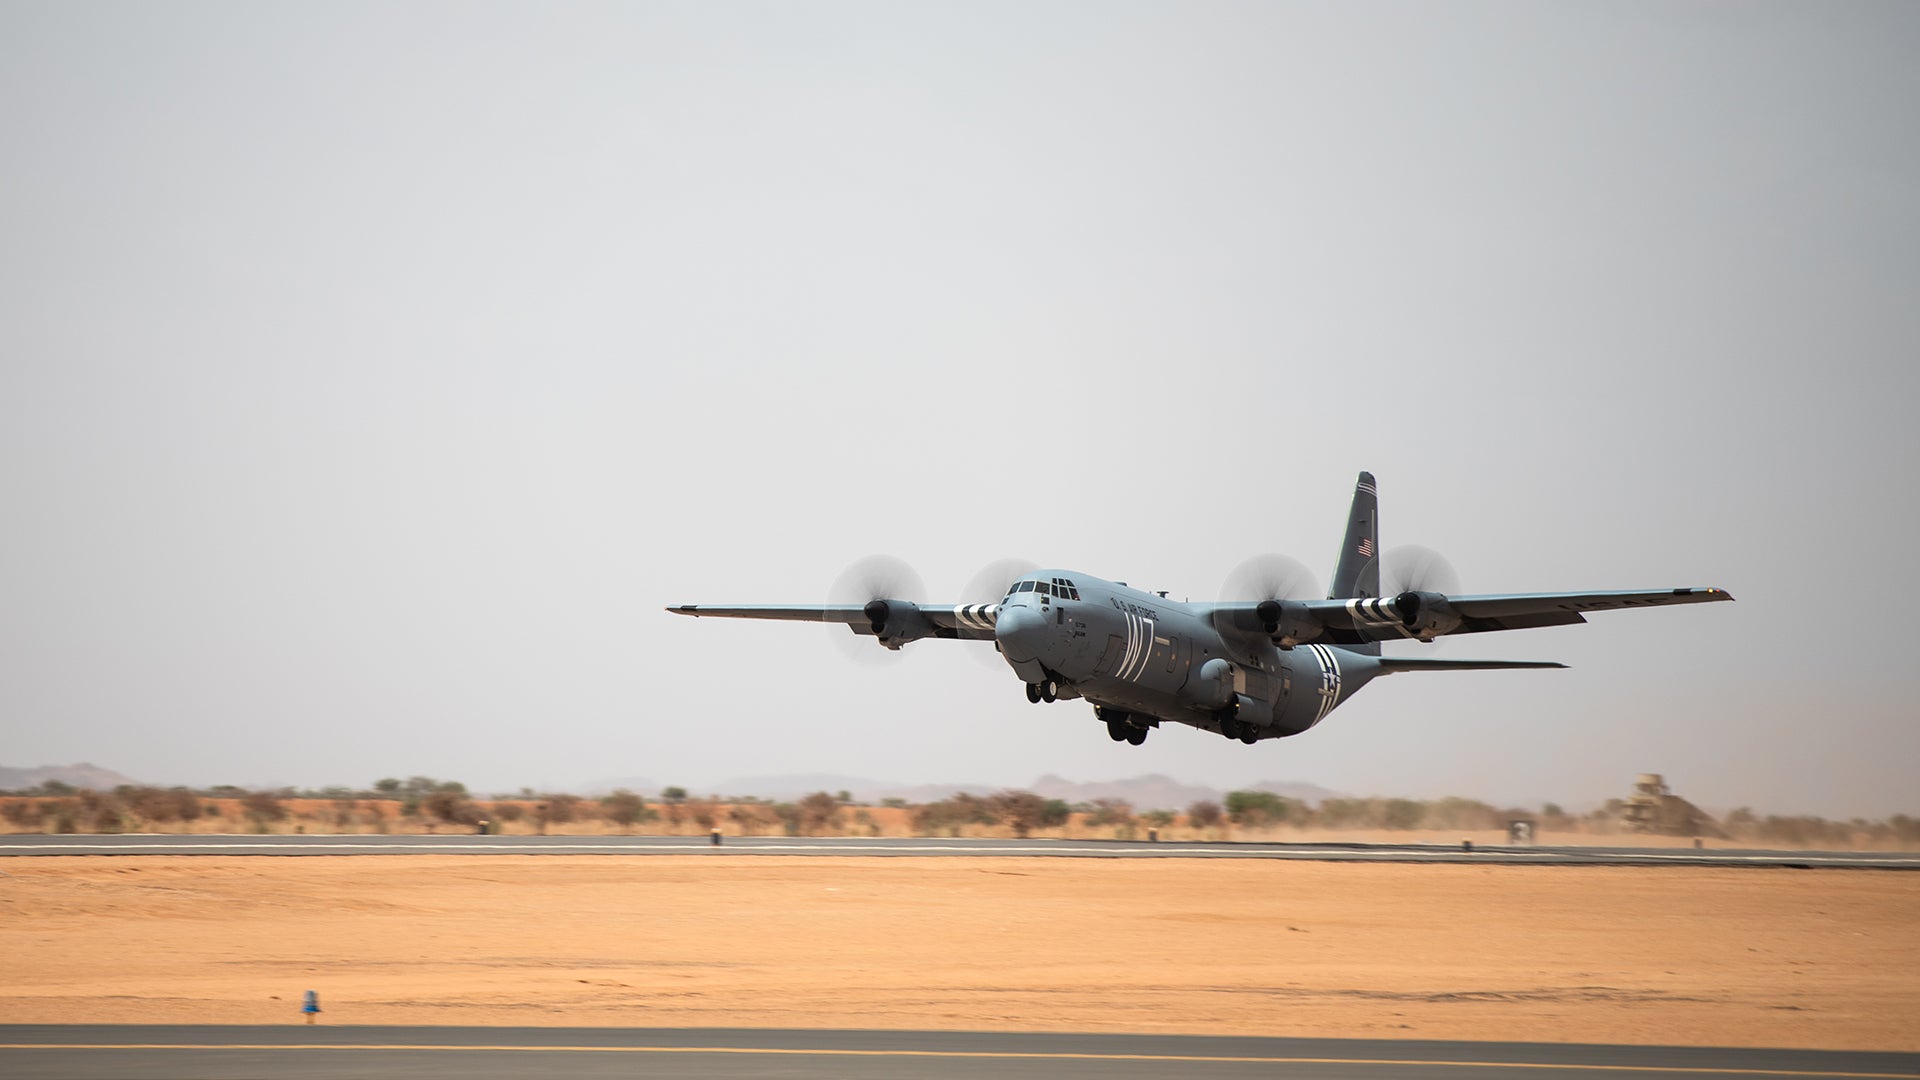 FILE: A U.S. Air Force C-130J Super Hercules assigned to the 37th Airlift Squadron at Ramstein Air Base, Germany, takes off from the new runway at Nigerien Air Base 201, Agadez, Niger, Aug. 3, 2019. The 6200-ft runway allows the Air Force to move assets in and out of Air Base 201 and is capable of supporting any aircraft up to a C-17 Globemaster III. (U.S. Air Force photo by Staff Sgt. Devin Boyer)